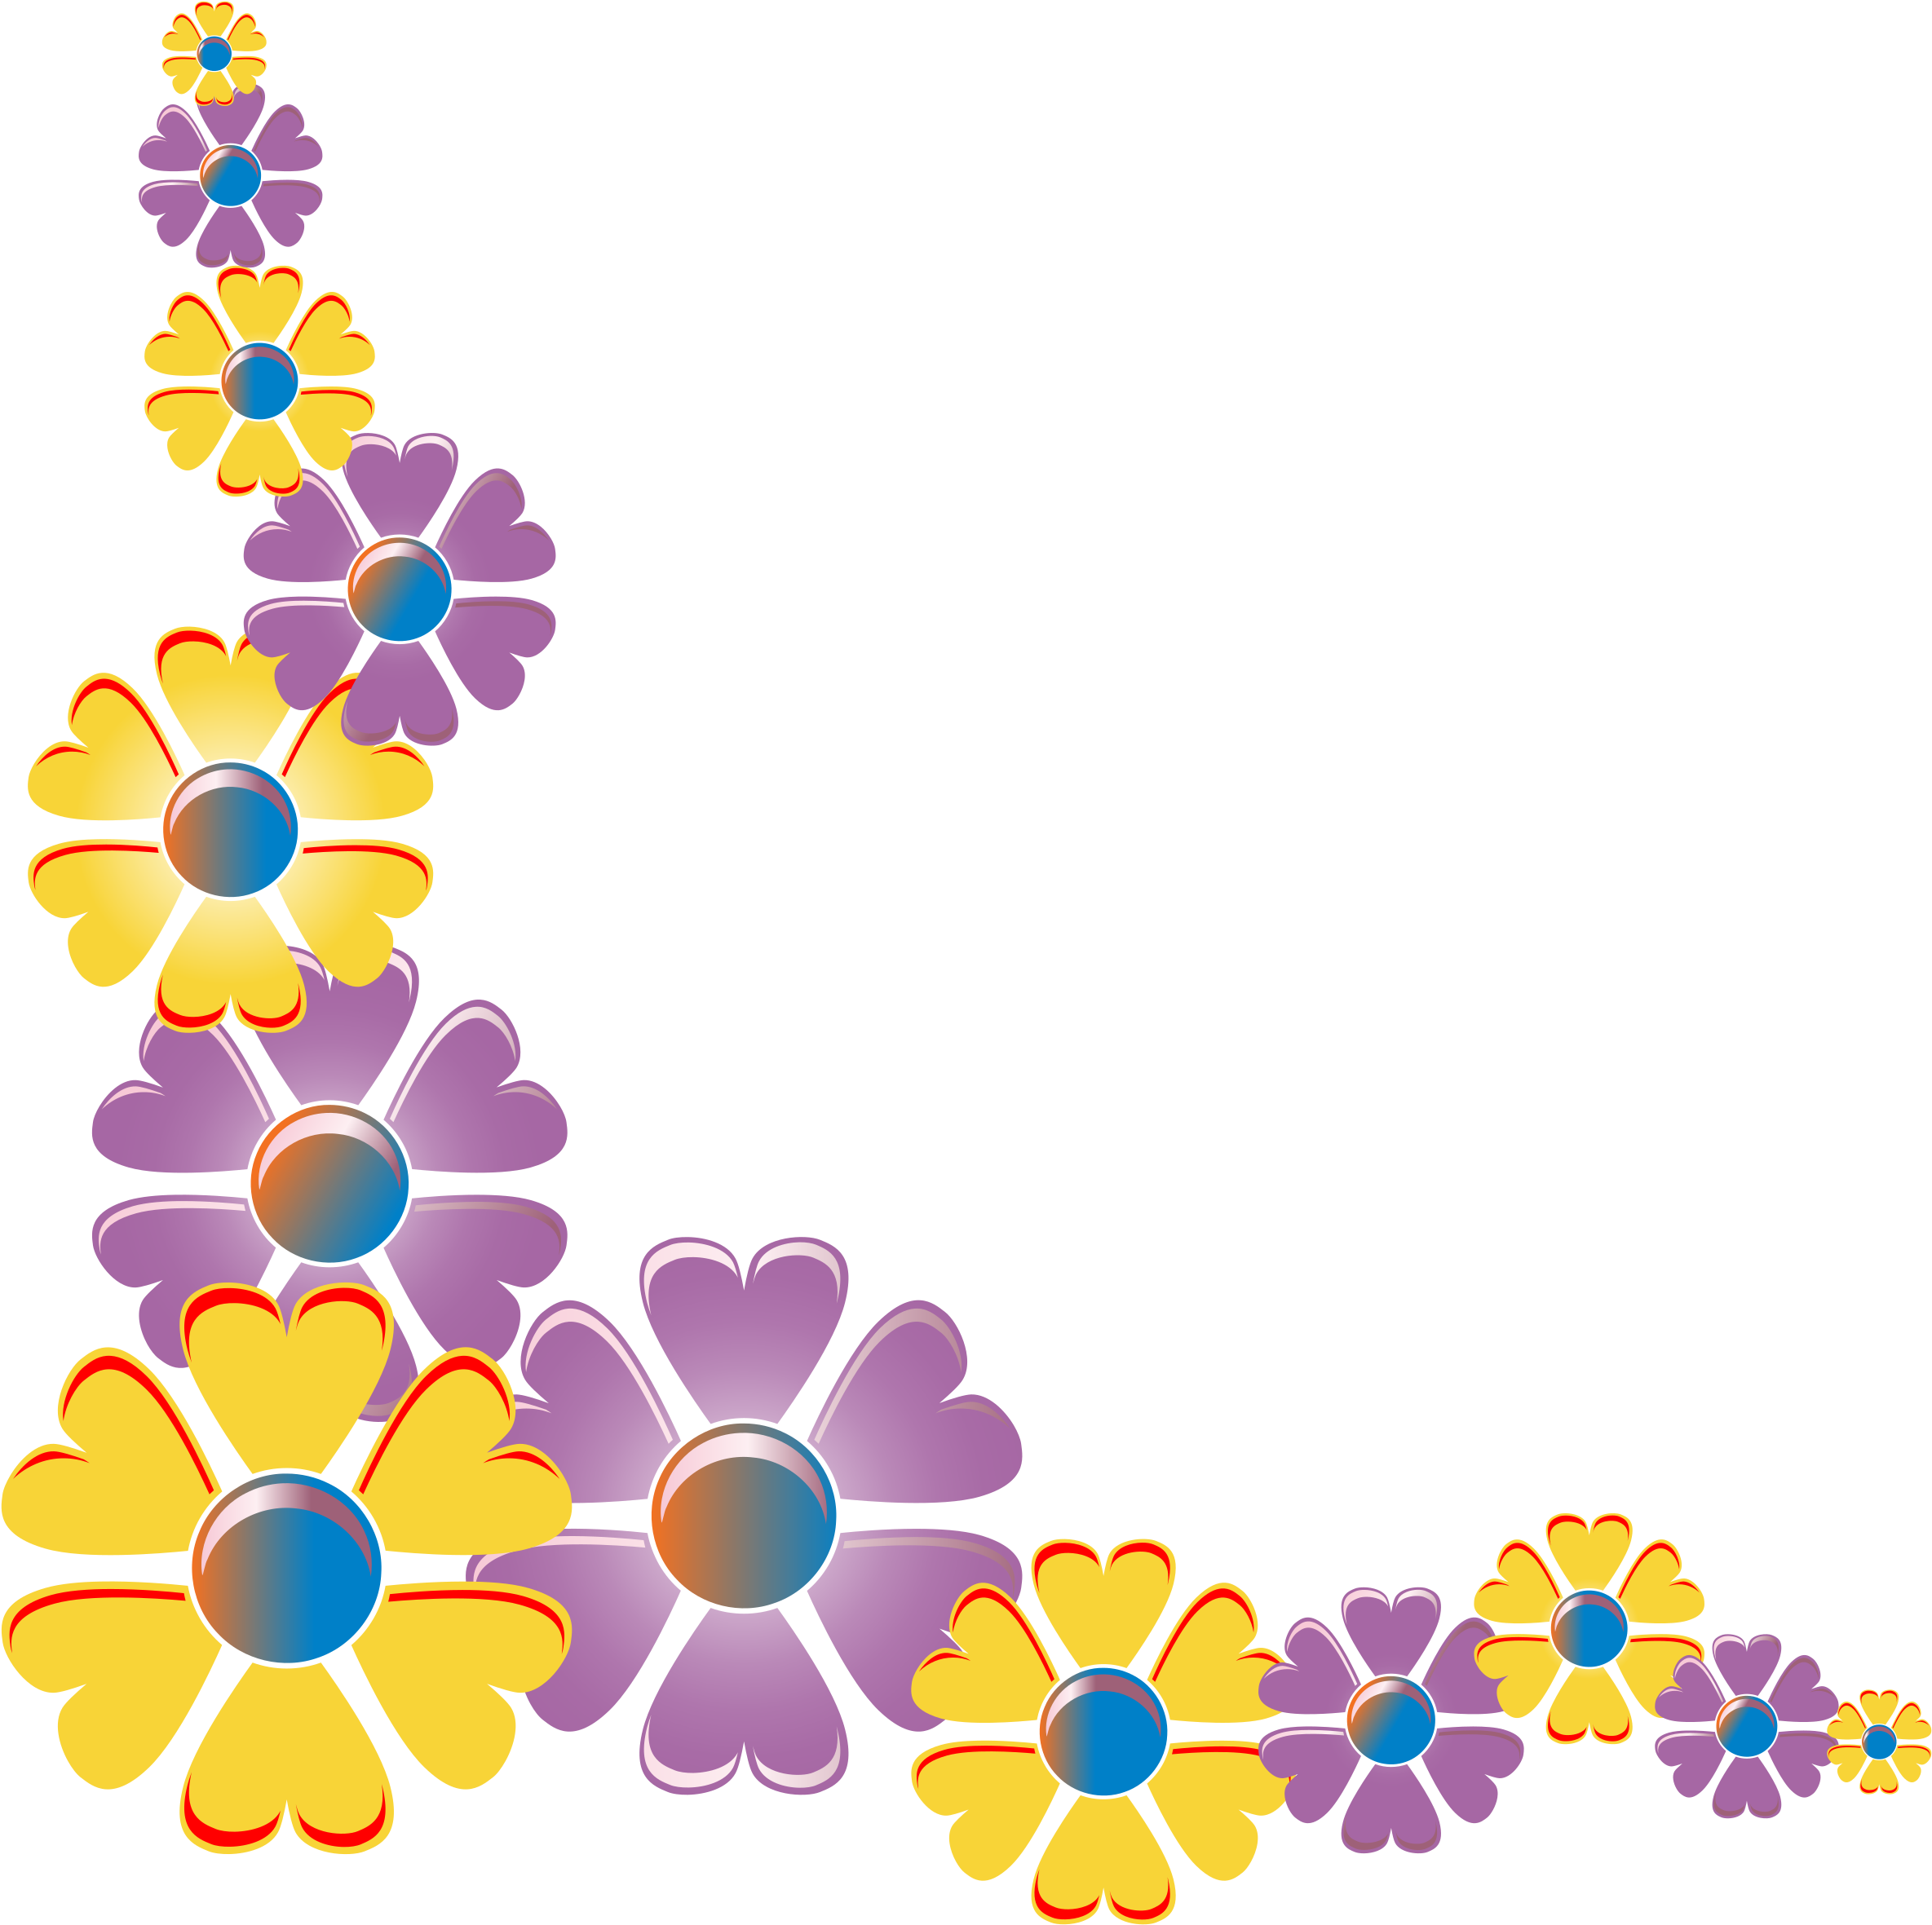 This Free Icons Png Design Of Flower Corner Variation - Clip Art Flowers (2400x2392)